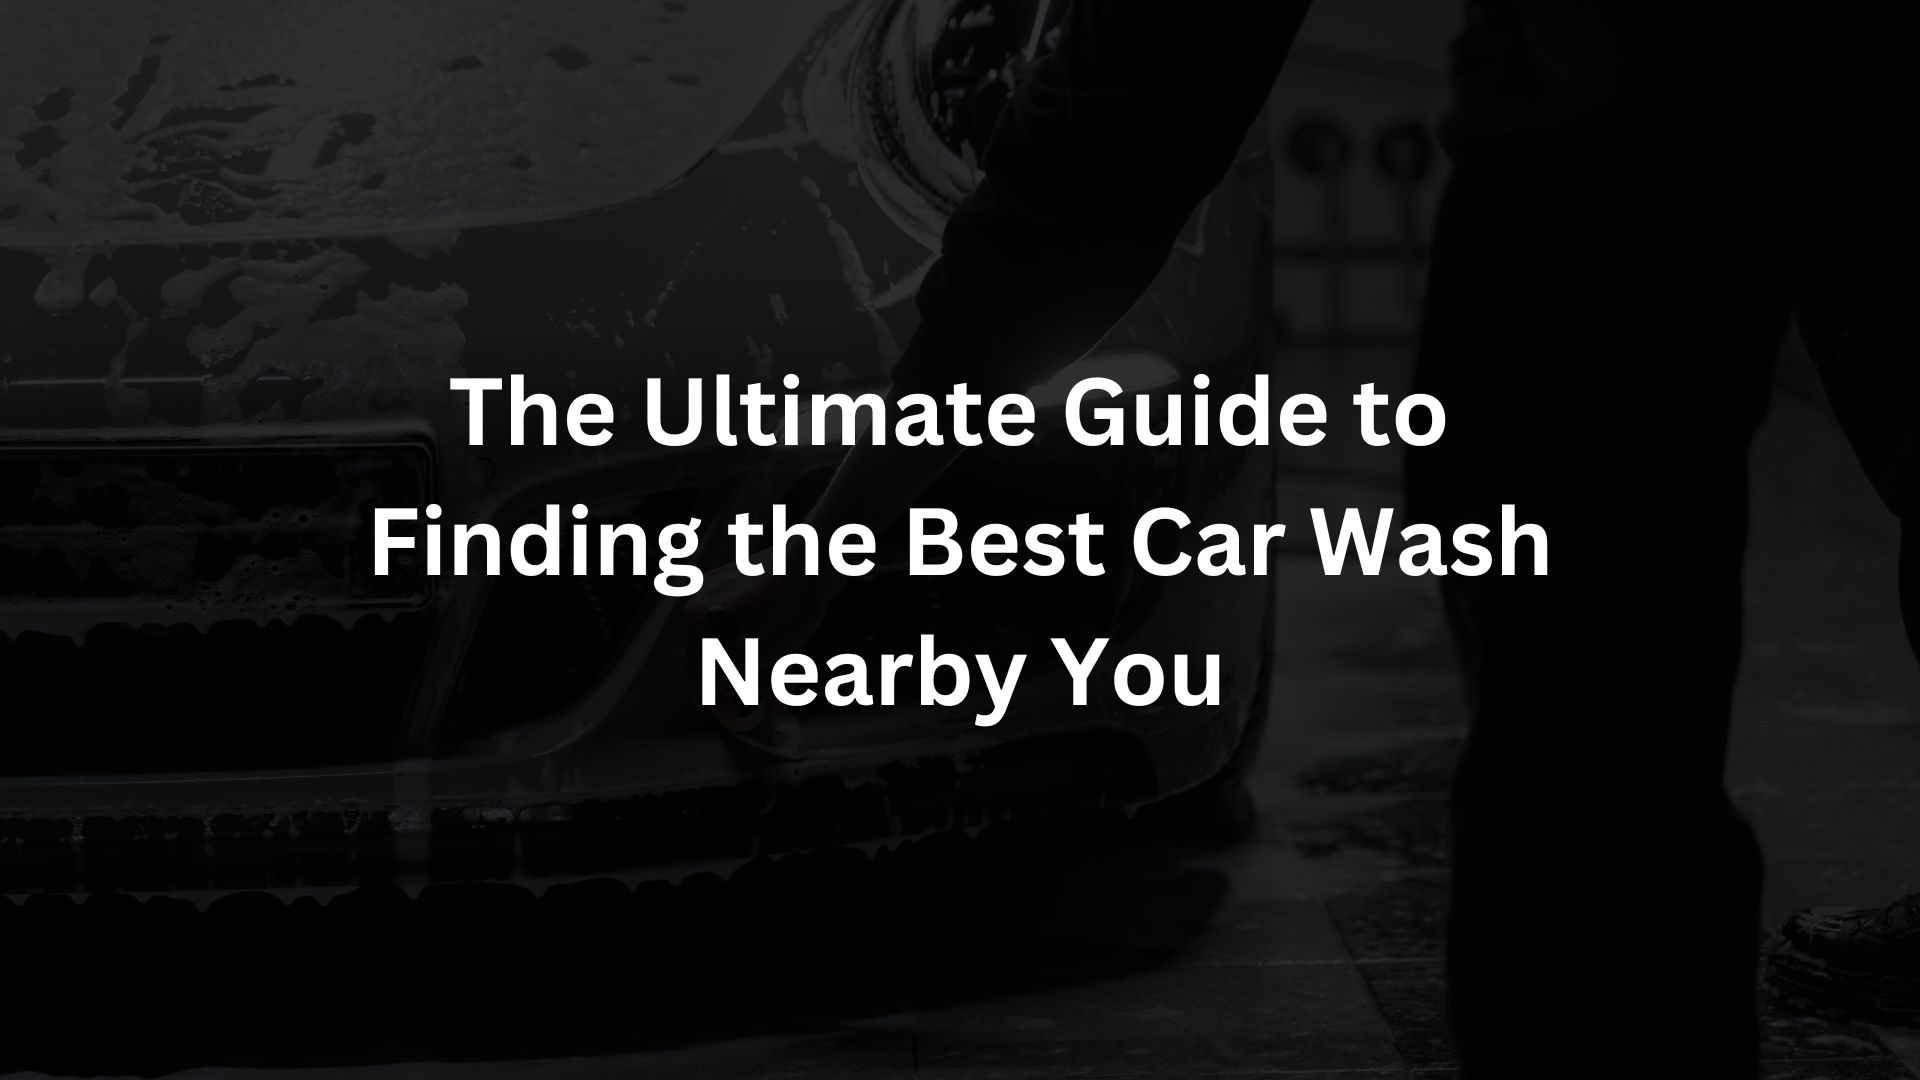 The Ultimate Guide to Finding the Best Car Wash Nearby You